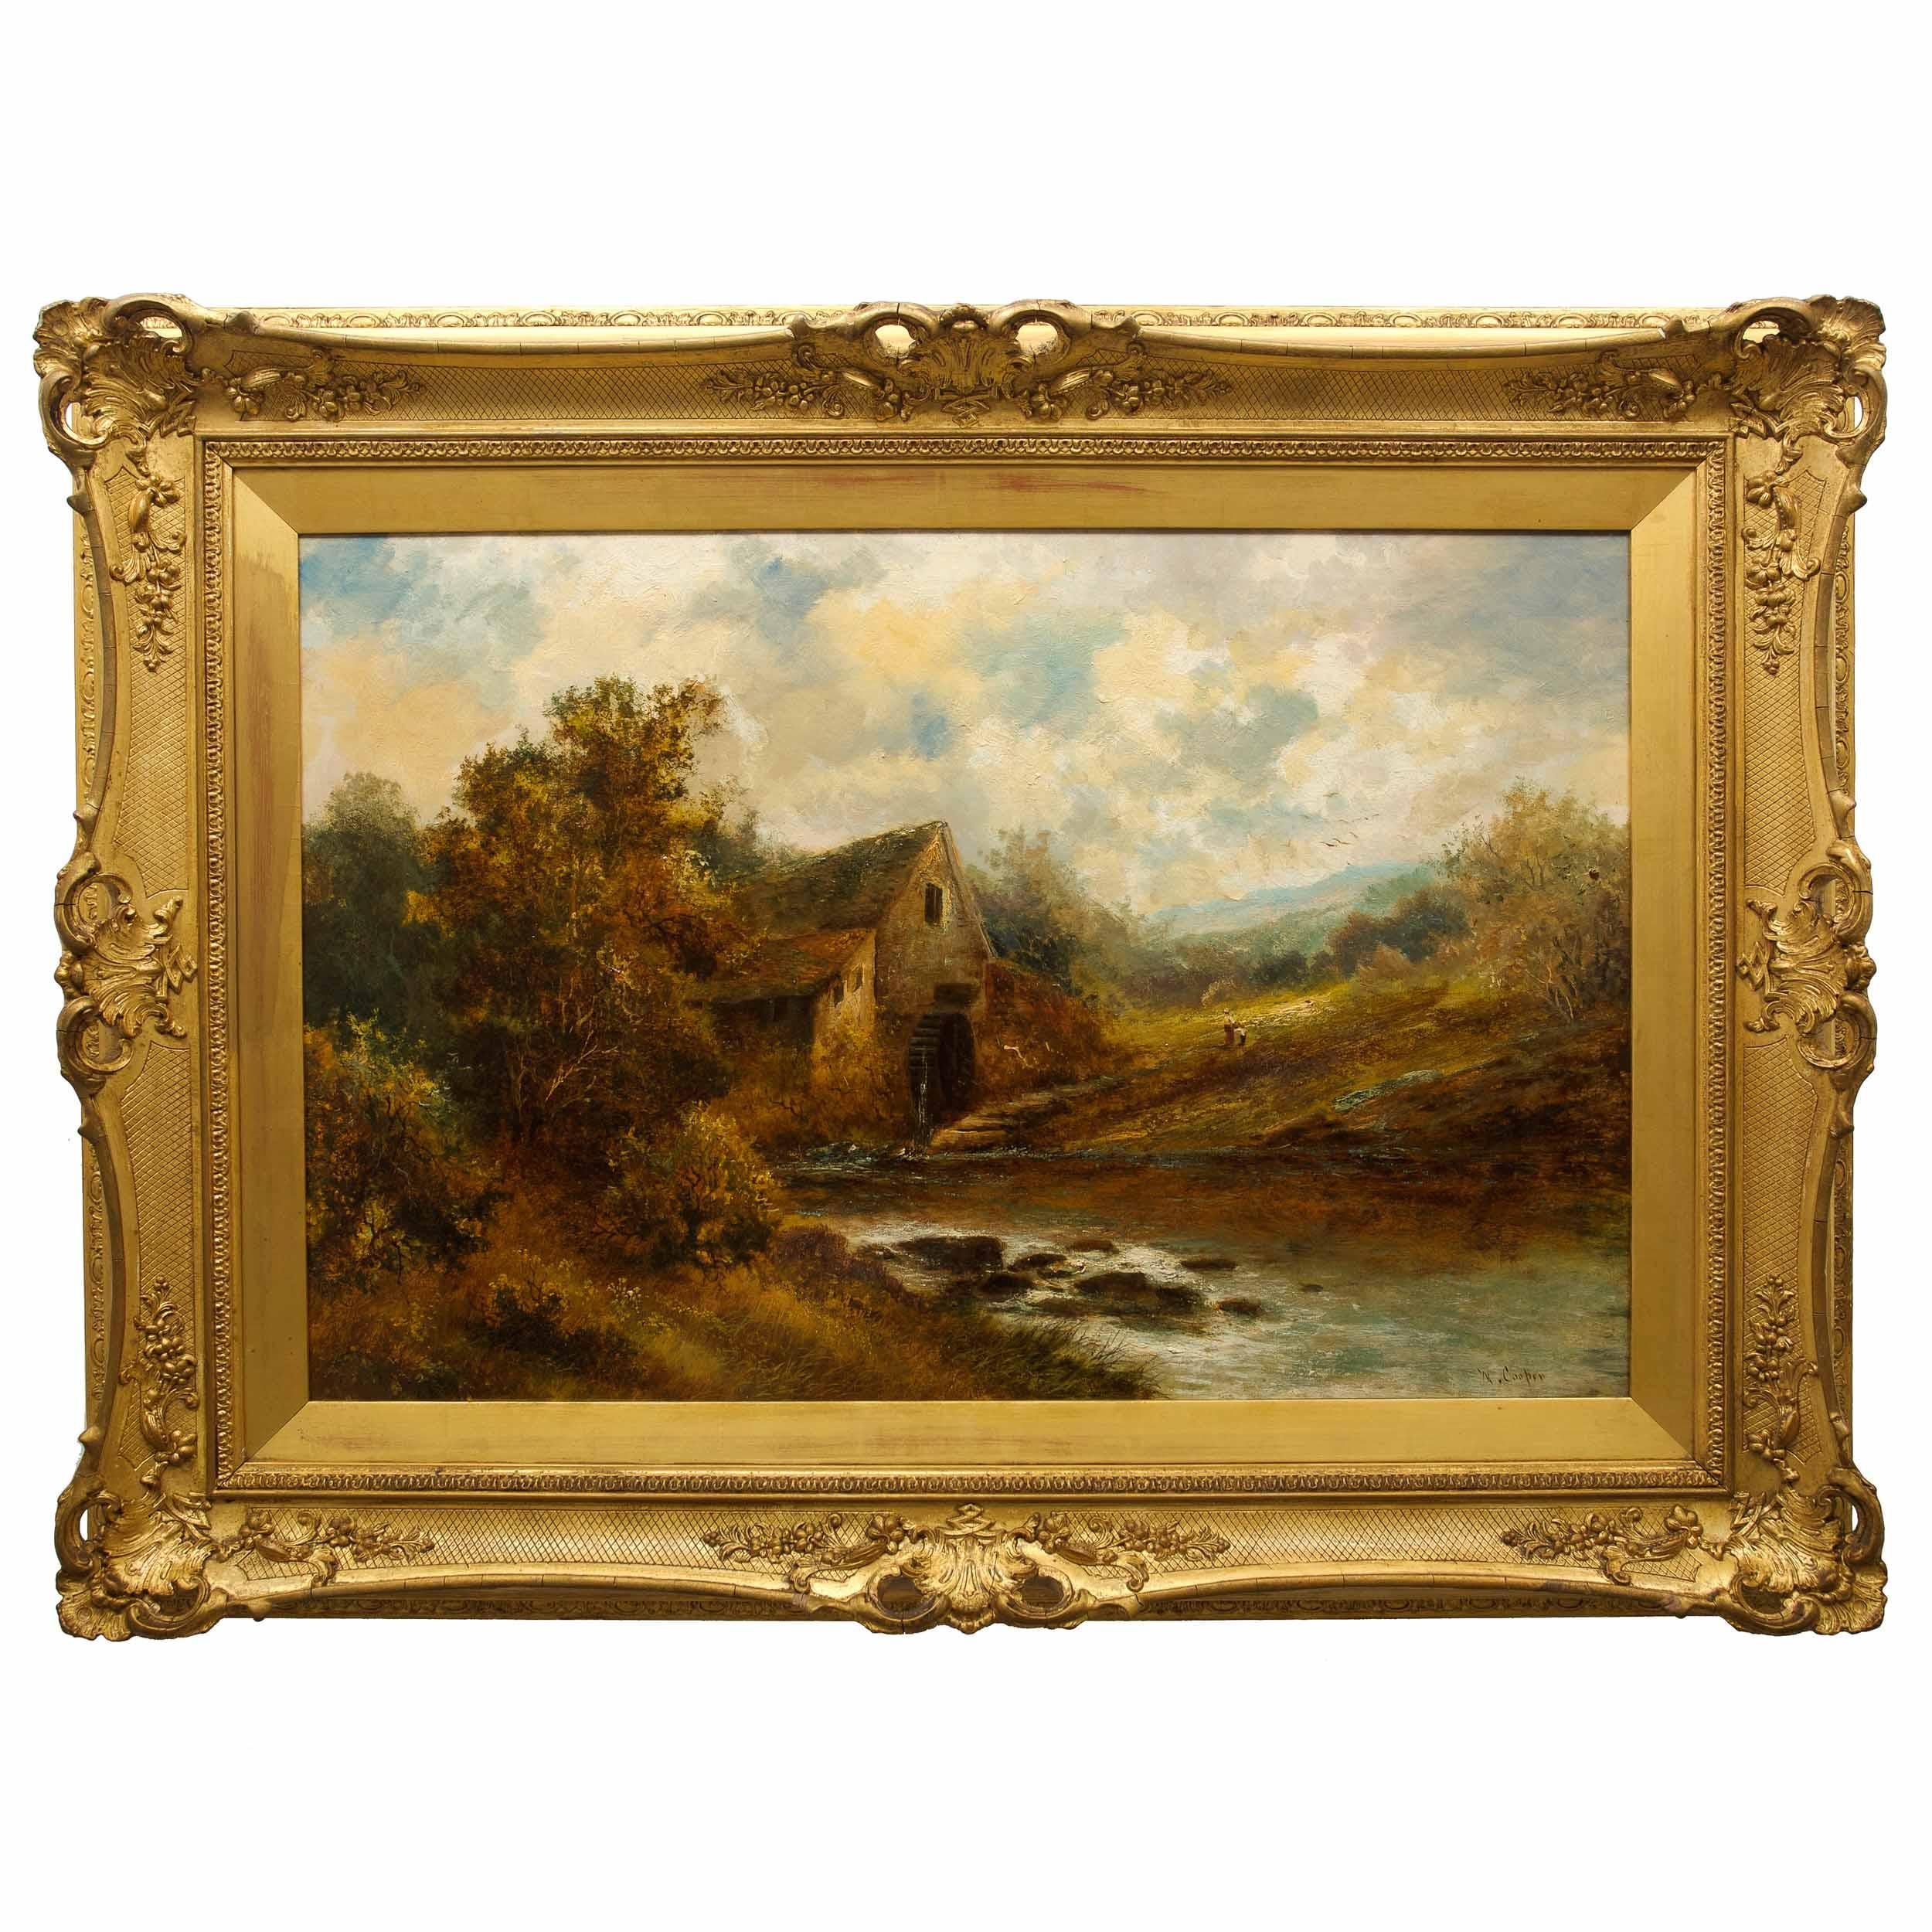 A superb late 19th century landscape scene depicting the rural English countryside under a heavy sky thick with clouds that capture the warmth of the sunlight and diffuse golden rays across the fall foliage of the extensive tree coverage below. The